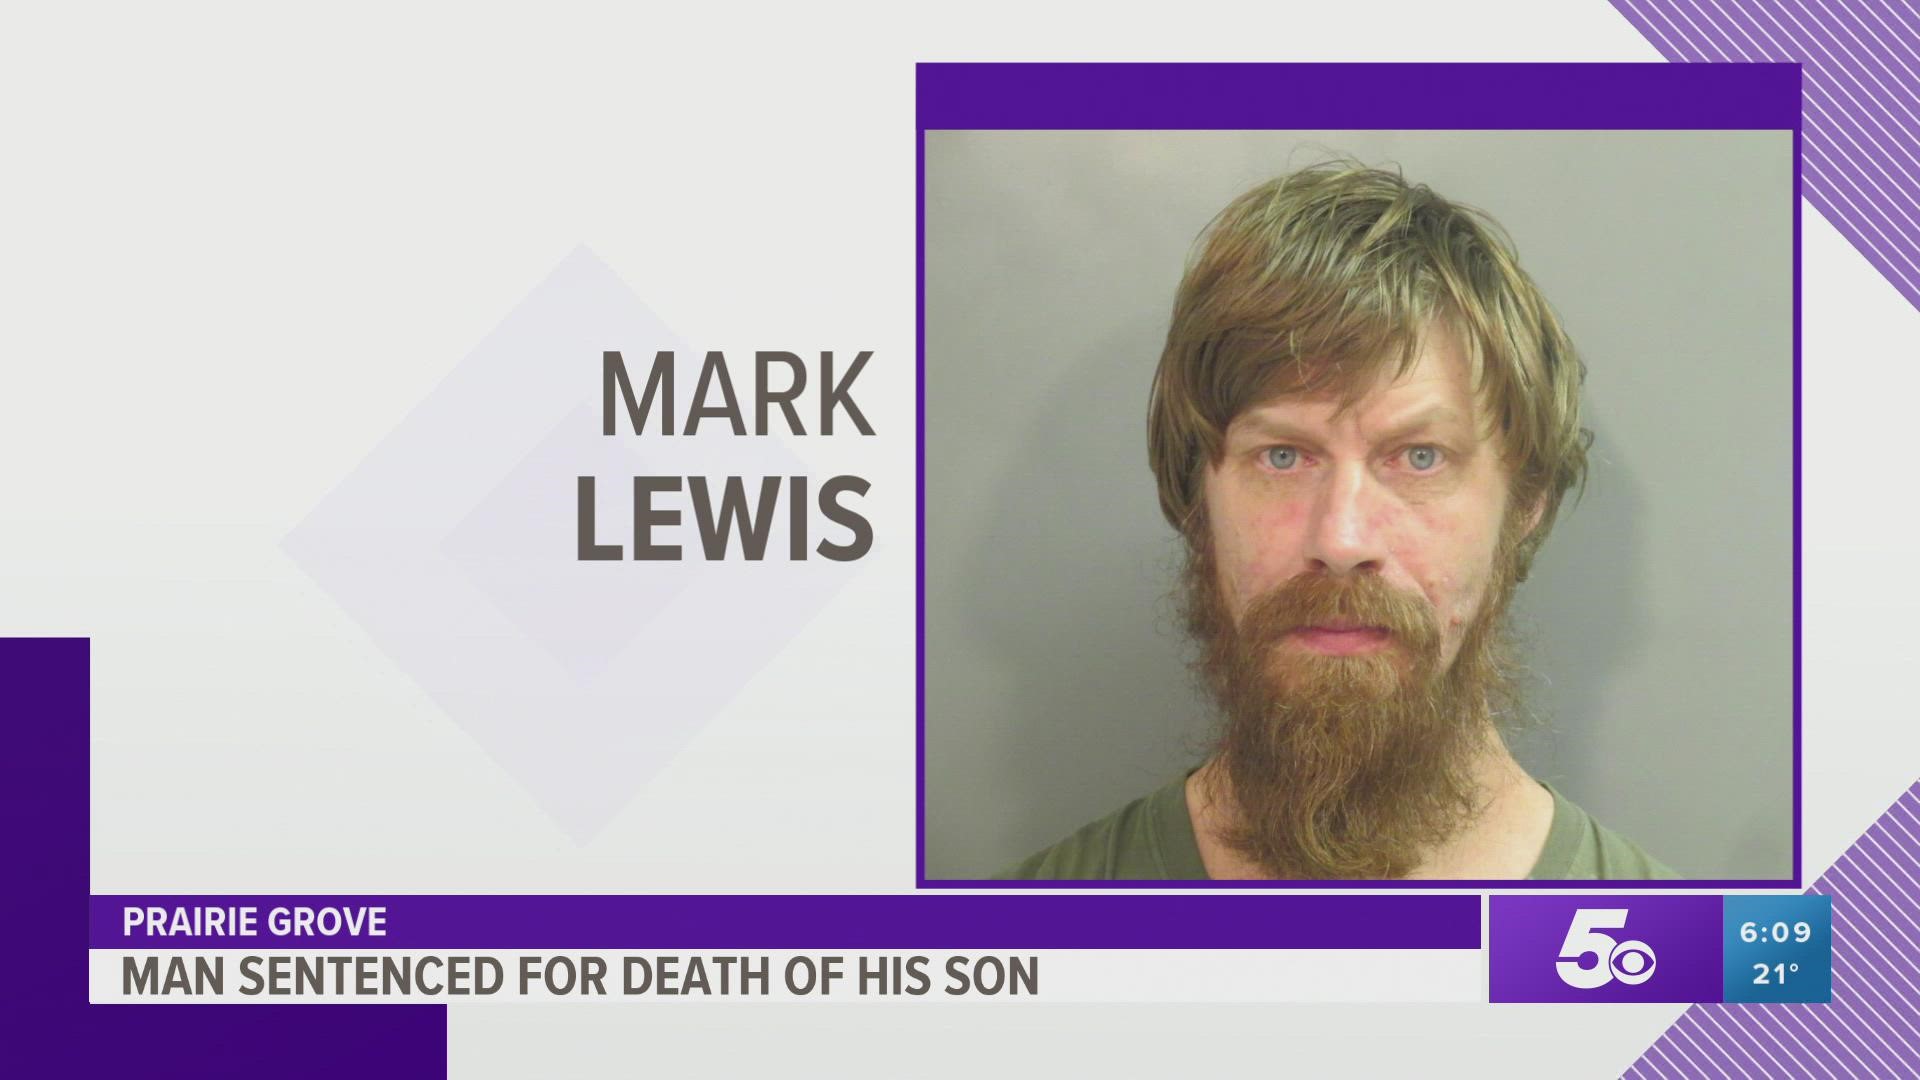 Mark Lewis will spend life behind bars for the 2019 murder of his 2-week old son.